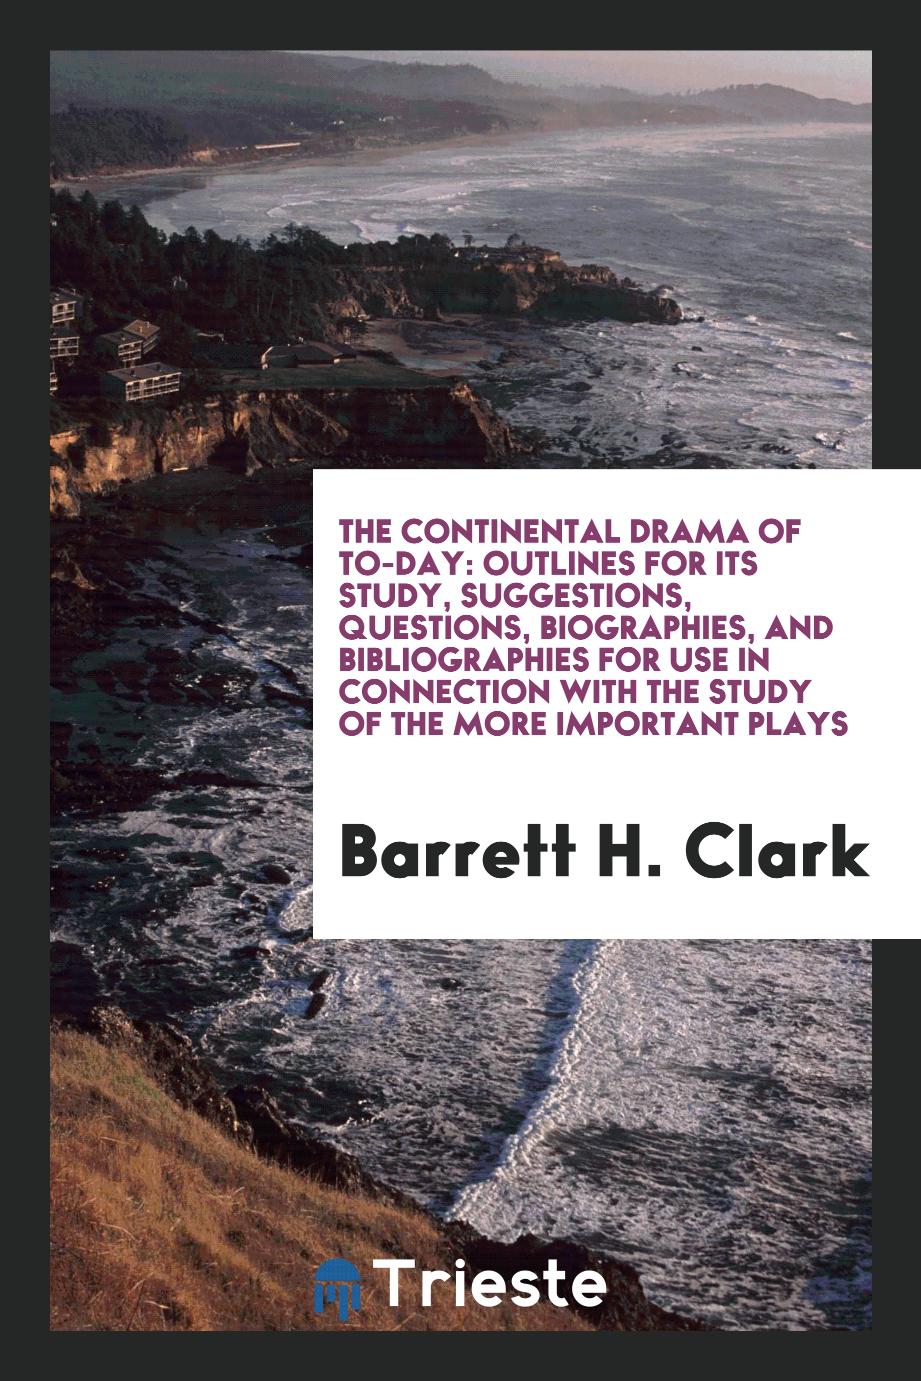 The continental drama of to-day: outlines for its study, suggestions, questions, biographies, and bibliographies for use in connection with the study of the more important plays